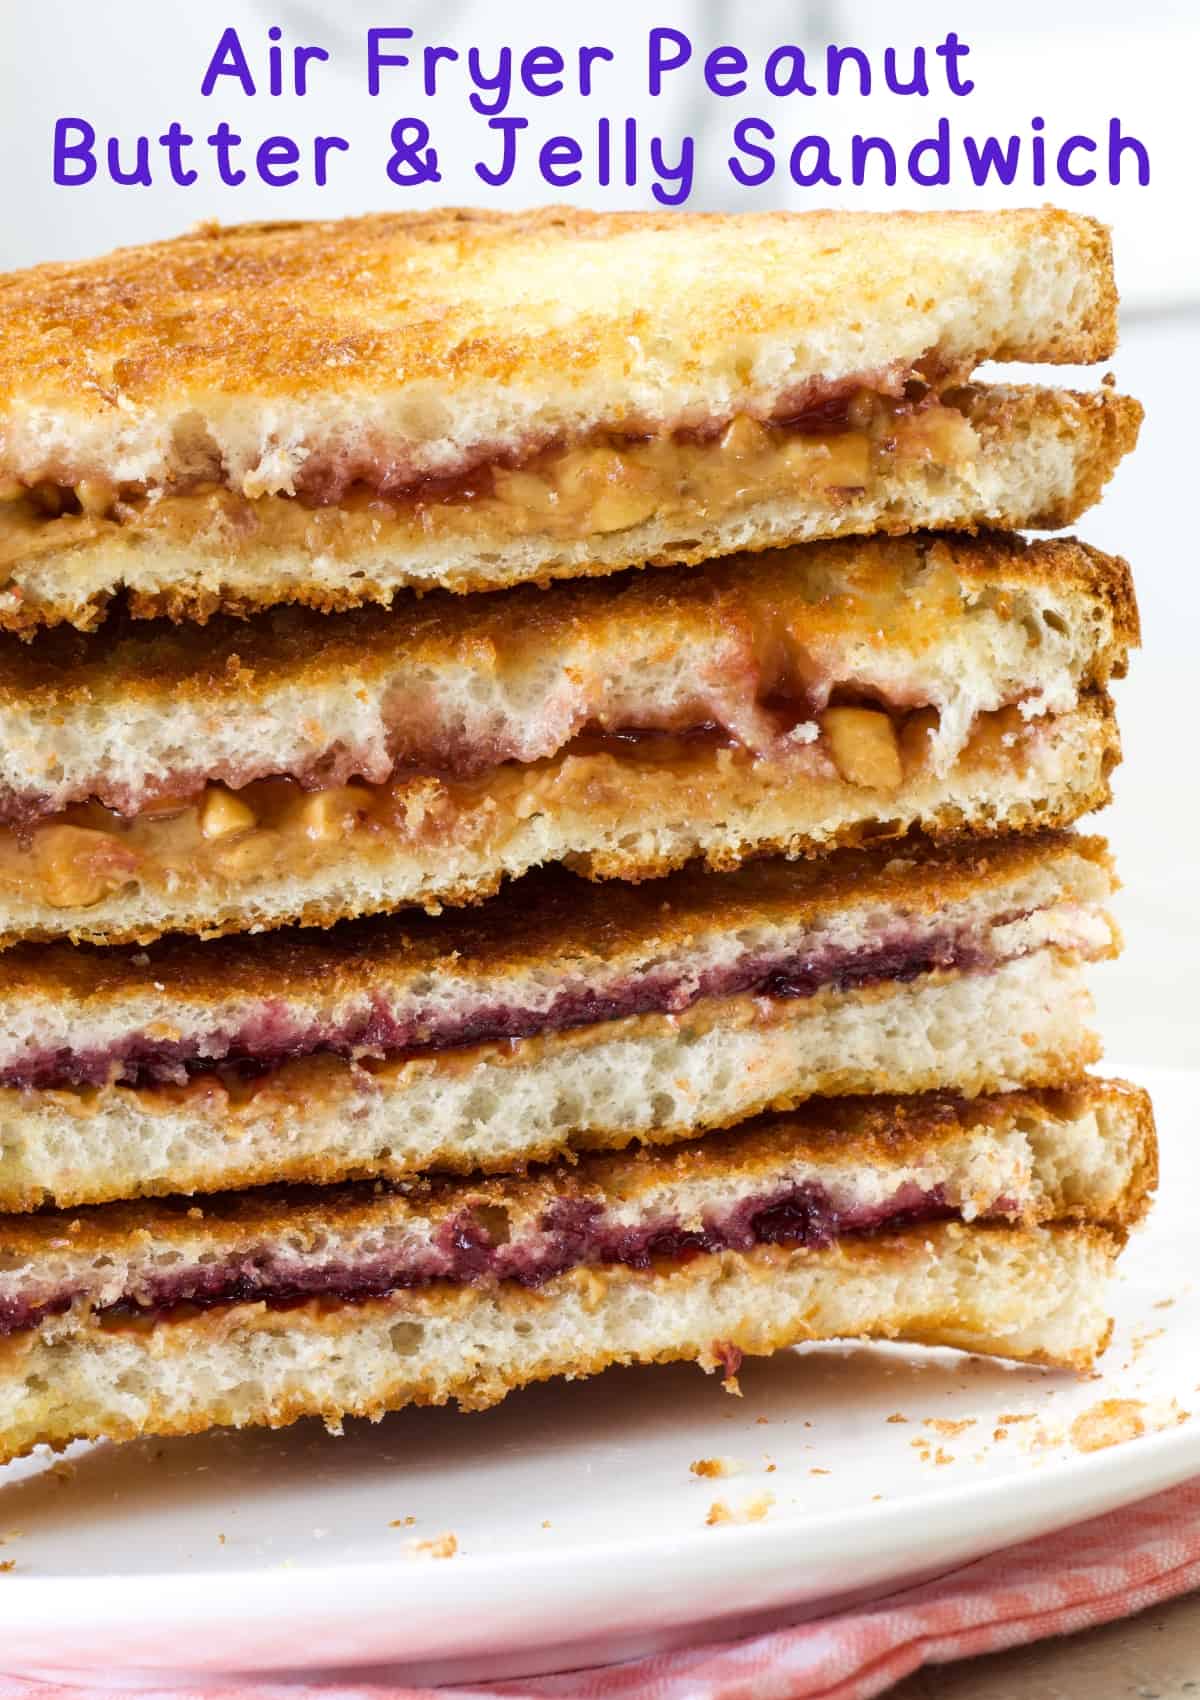 Air Fryer Peanut Butter and Jelly Sandwich recipe takes the classic sandwich to the next level. It is warm and delicious! via @mindyscookingobsession